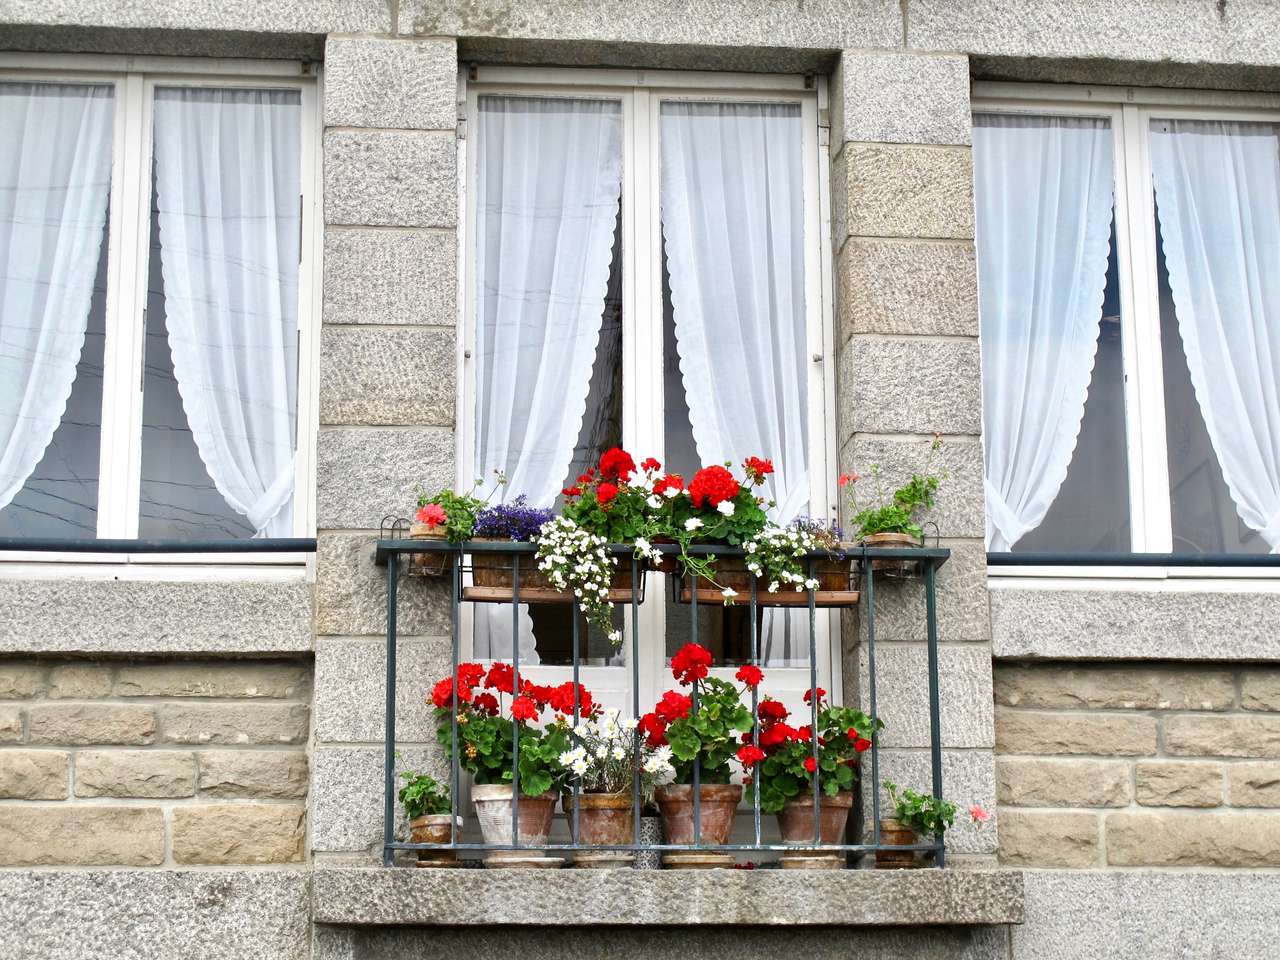 Geraniums on the balcony online puzzle